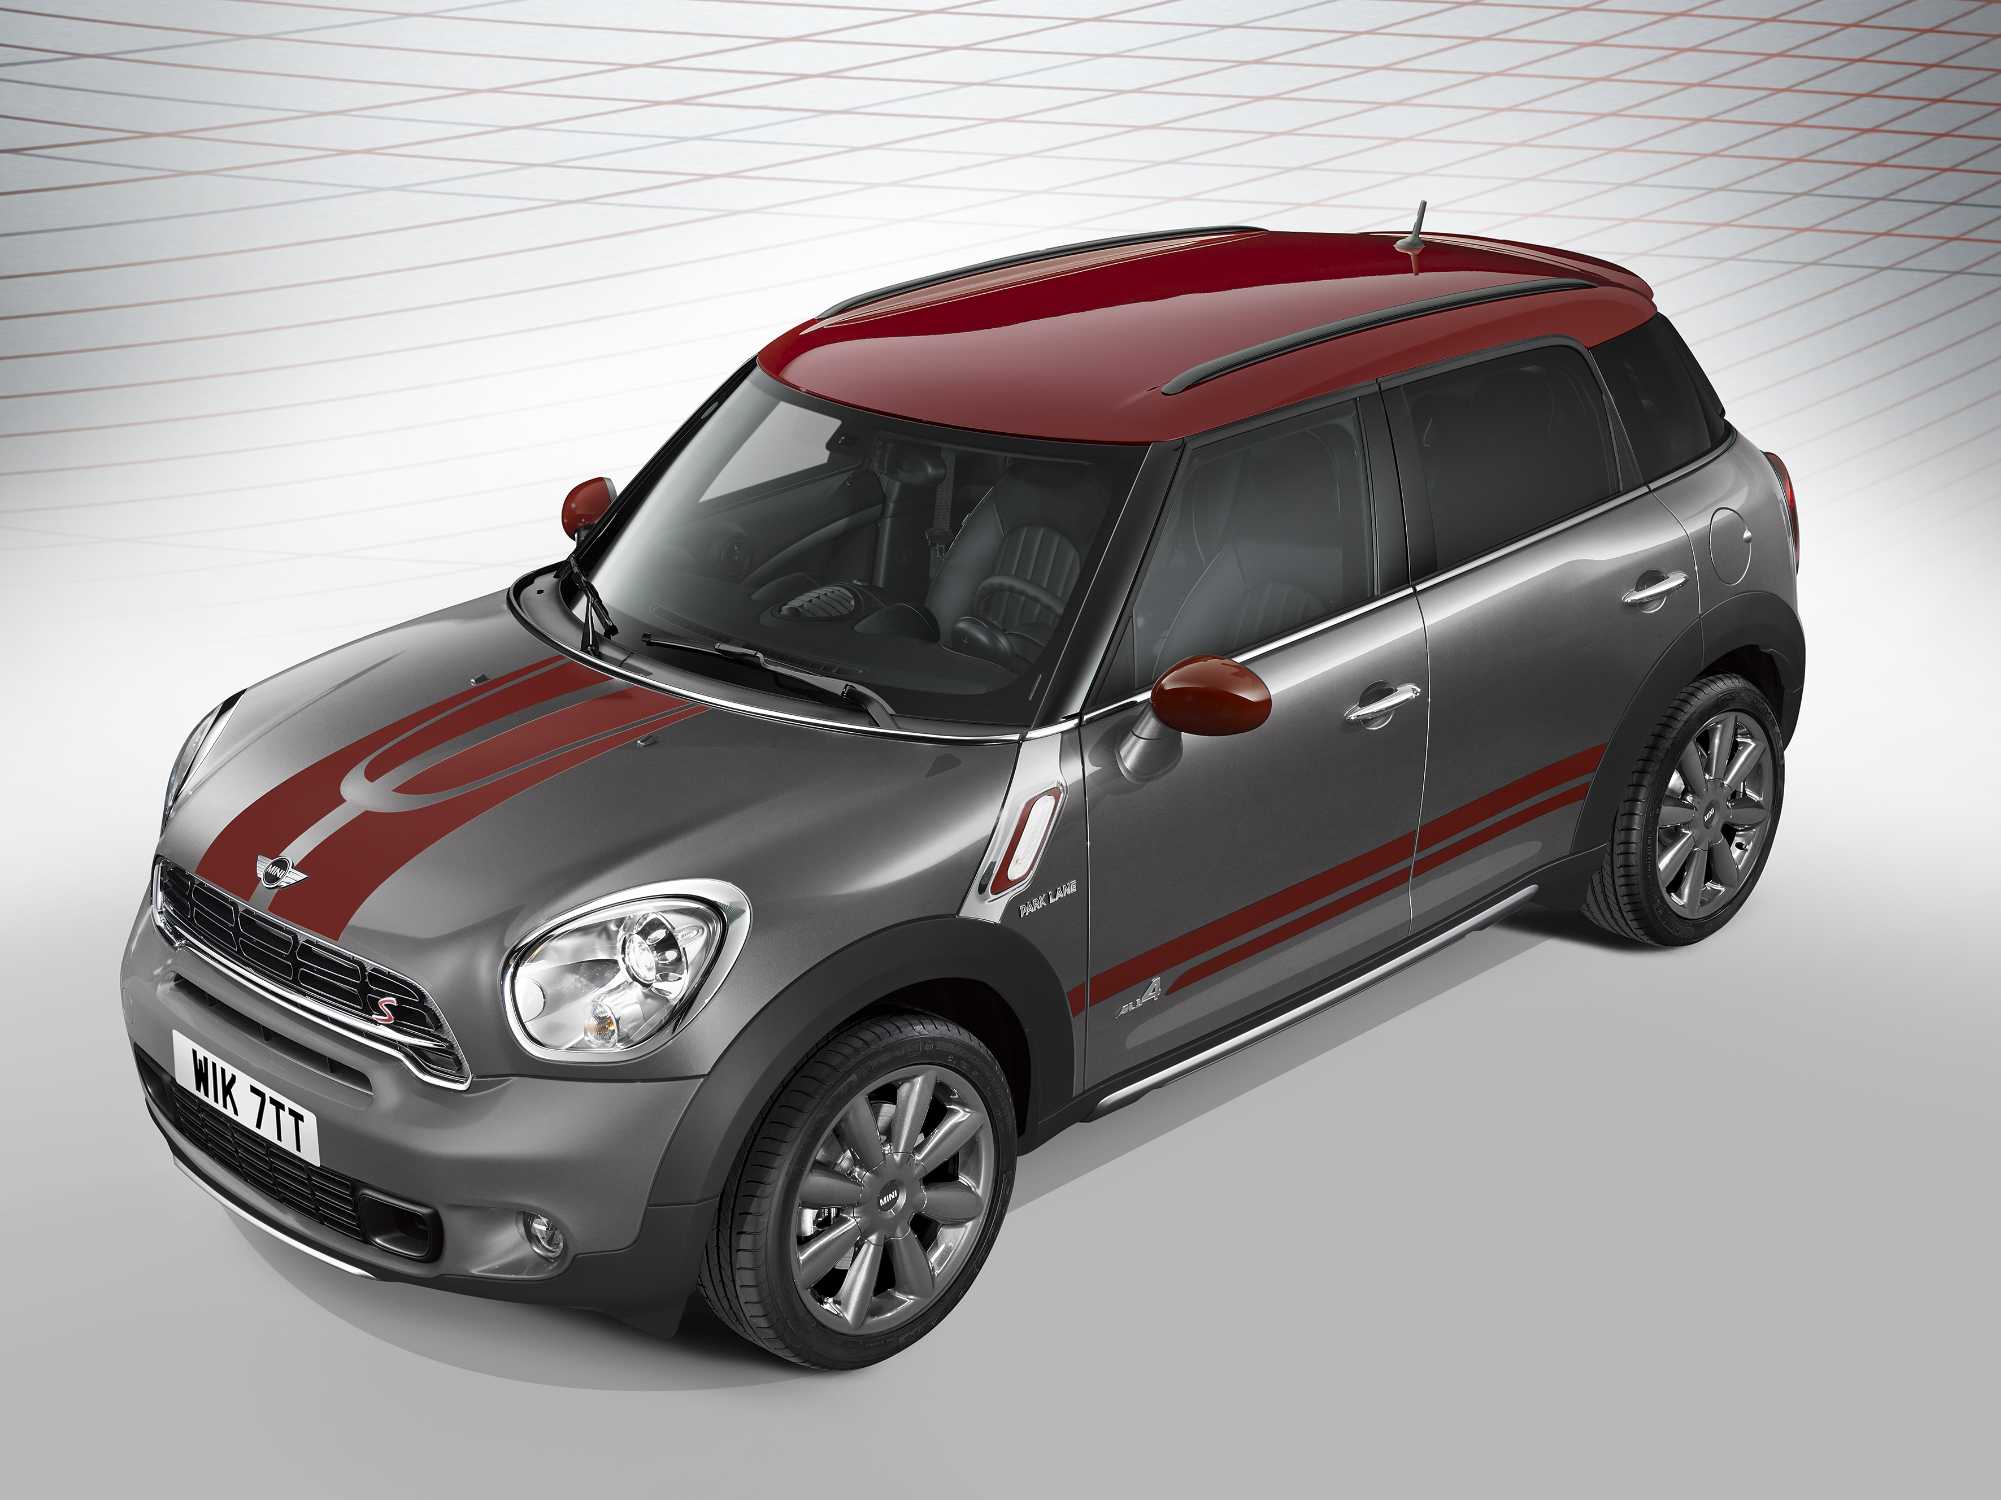 All Round Talent With Individual Style The Mini Countryman